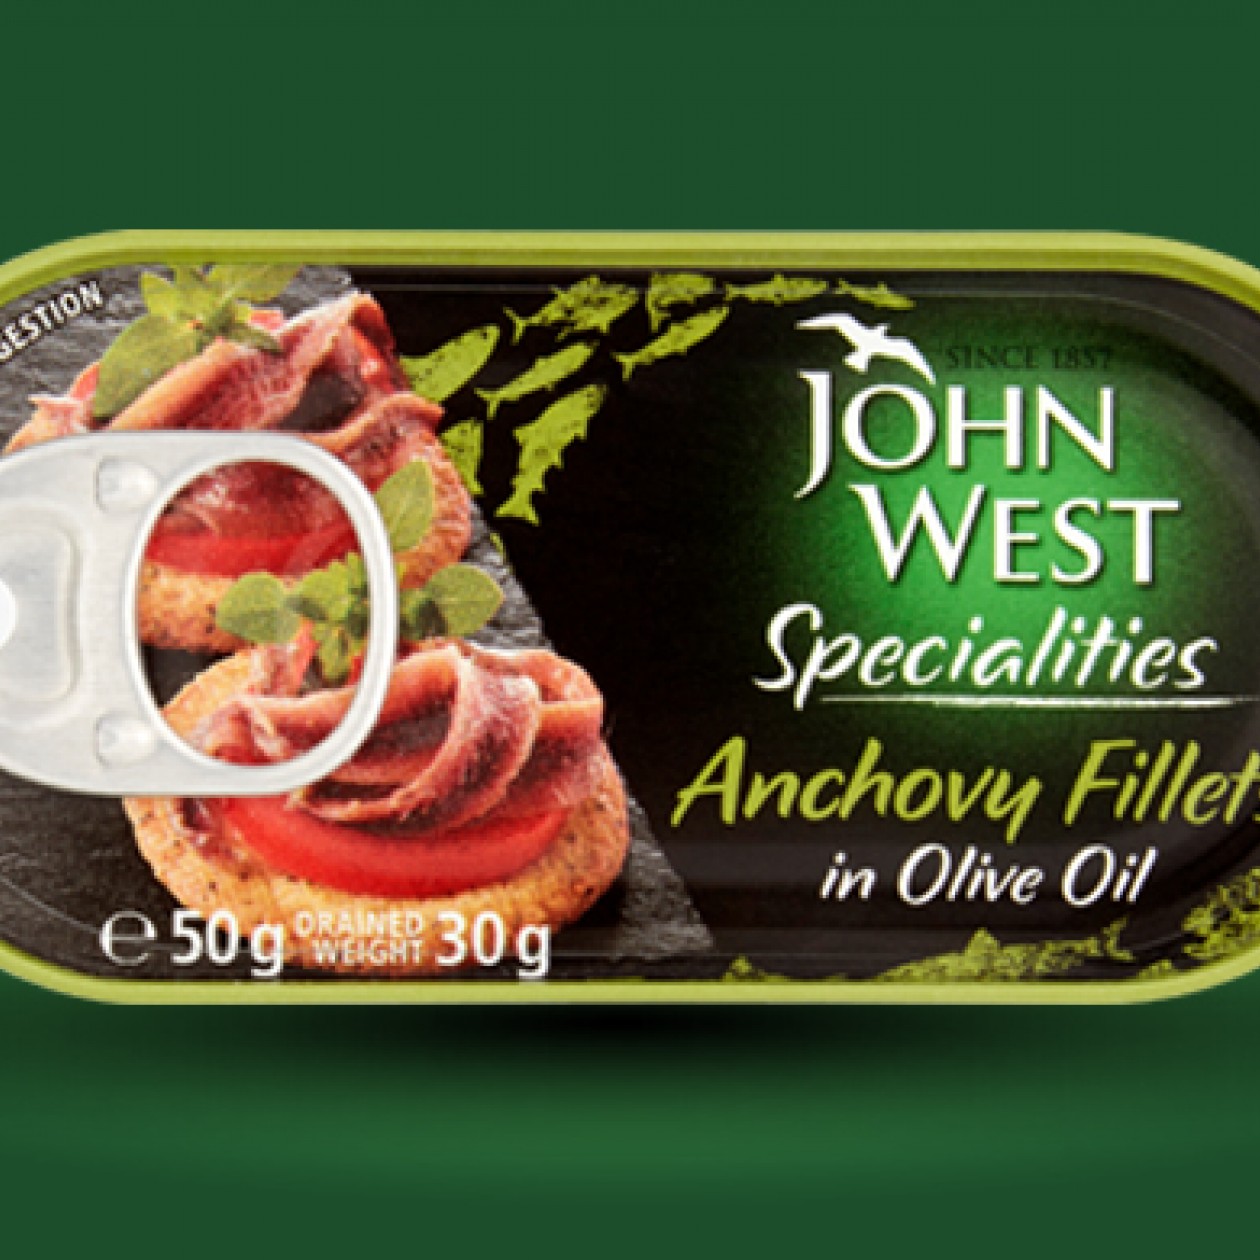 John West Anchovy Fillets in Olive Oil 12 x 50g